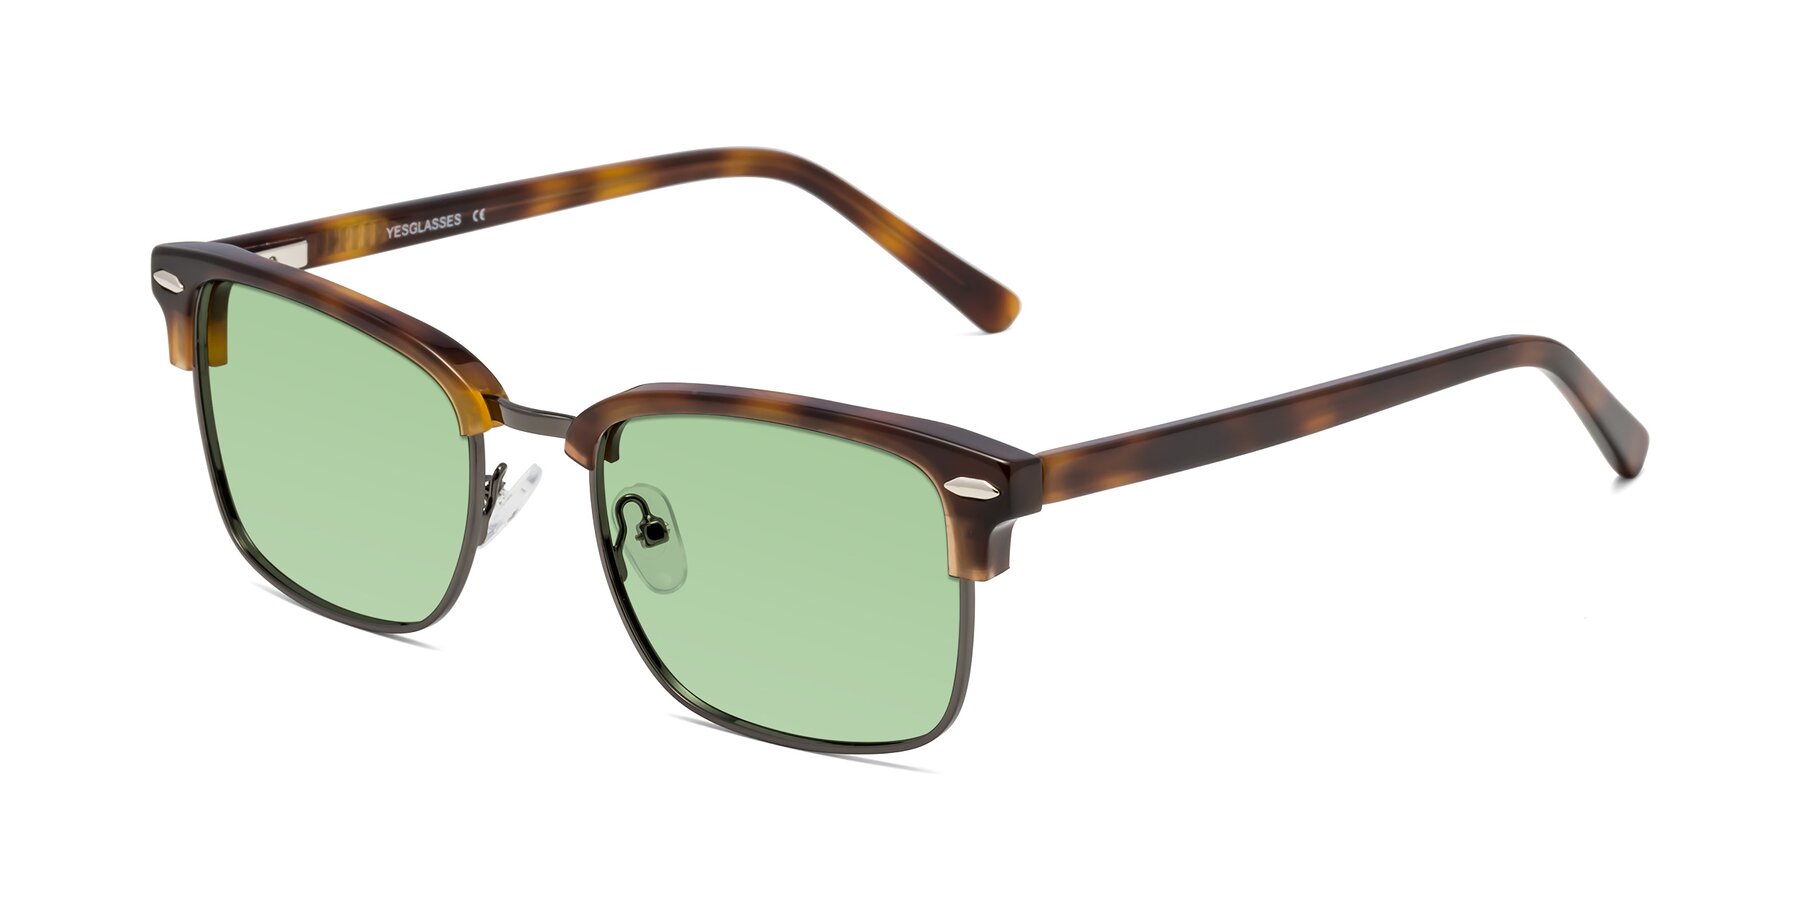 Angle of 17464 in Tortoise/ Gunmetal with Medium Green Tinted Lenses